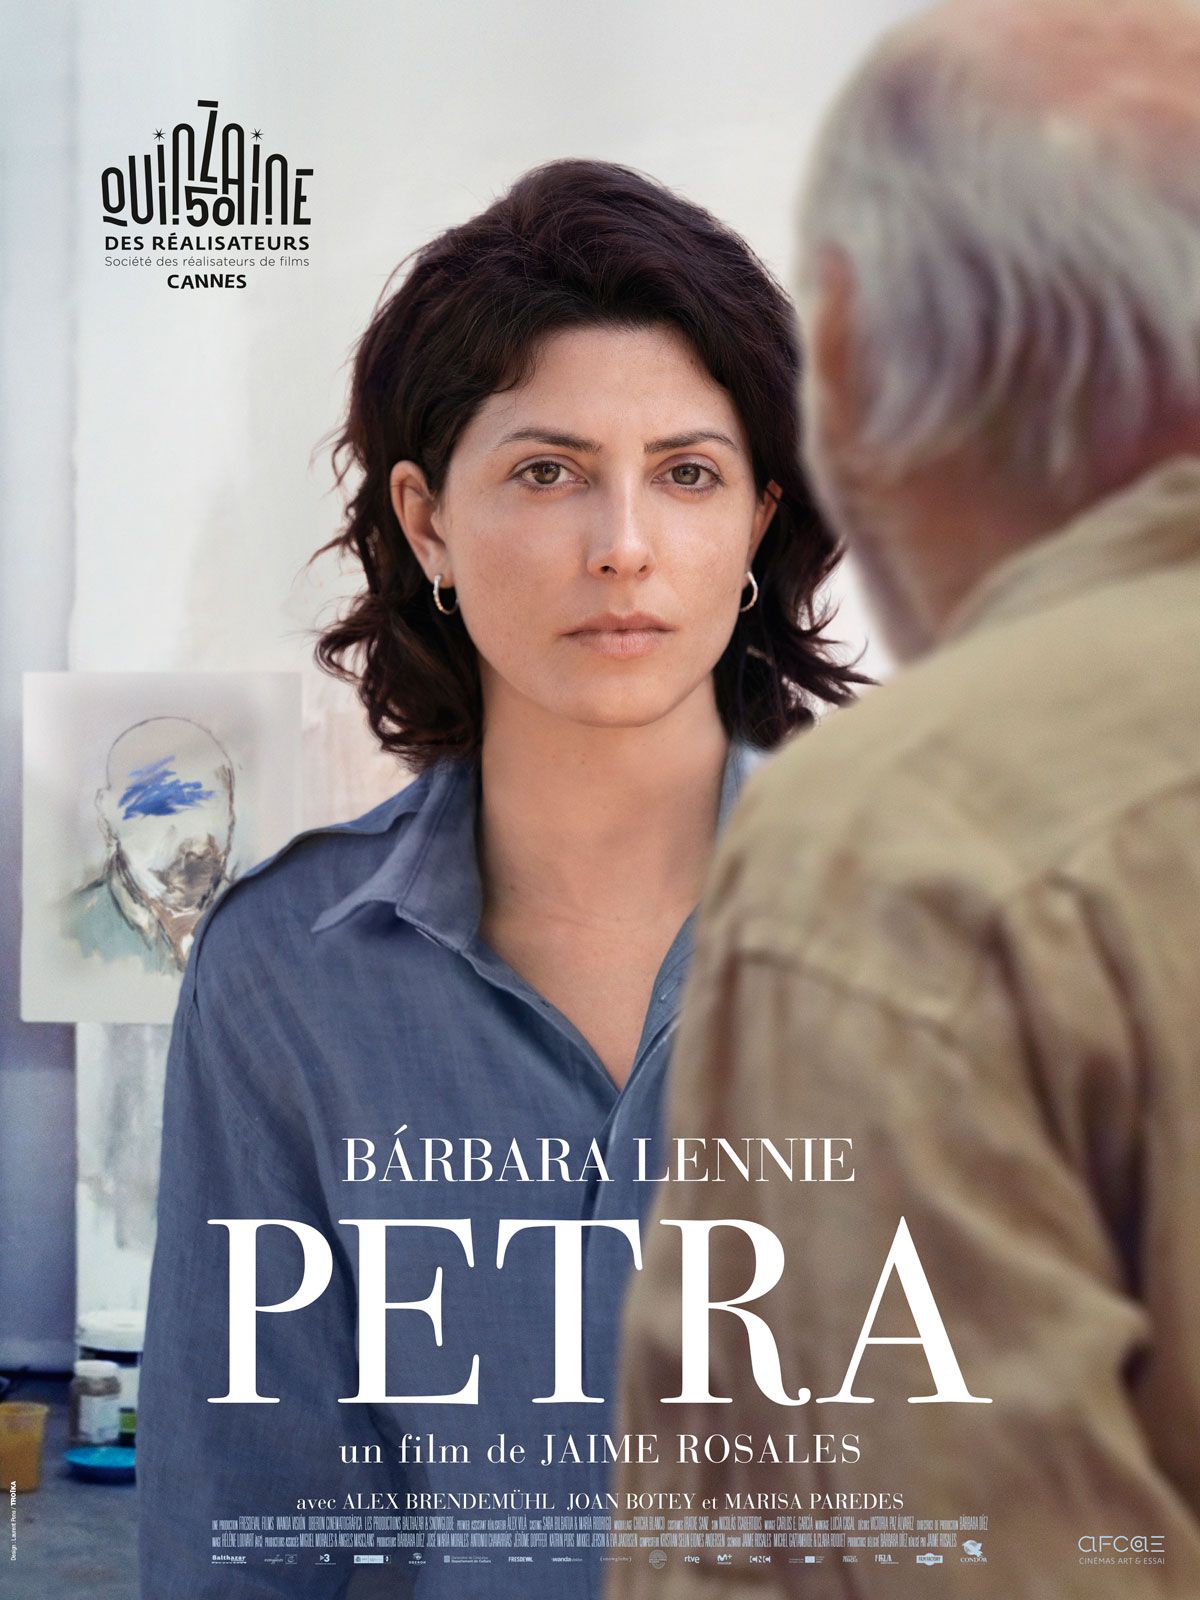 Petra - Film (2019) streaming VF gratuit complet